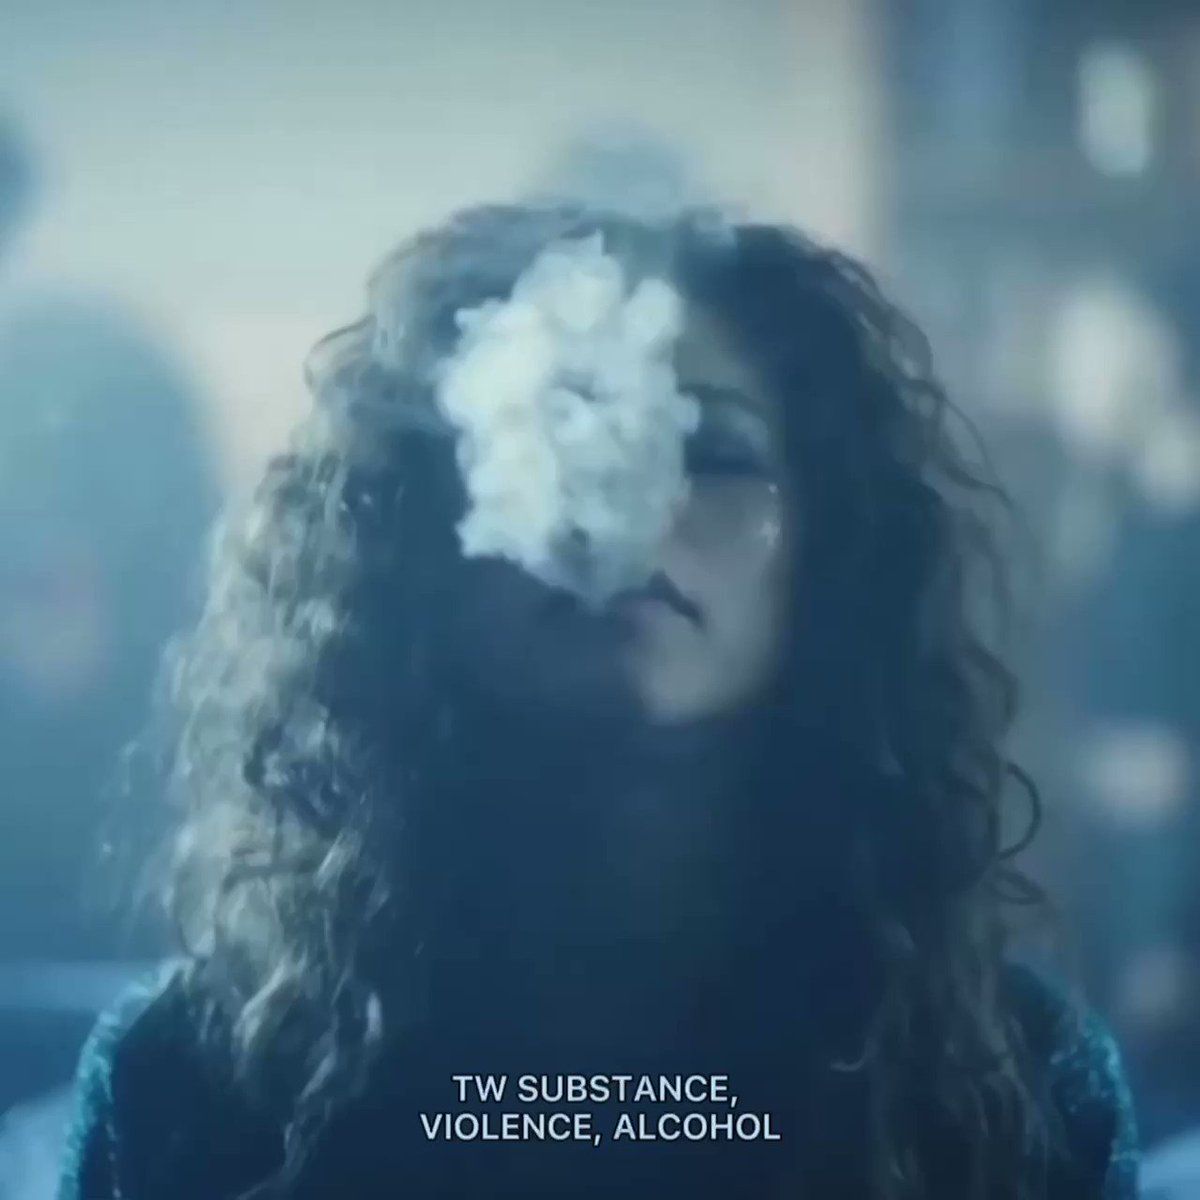 A woman smoking in front of people - Euphoria